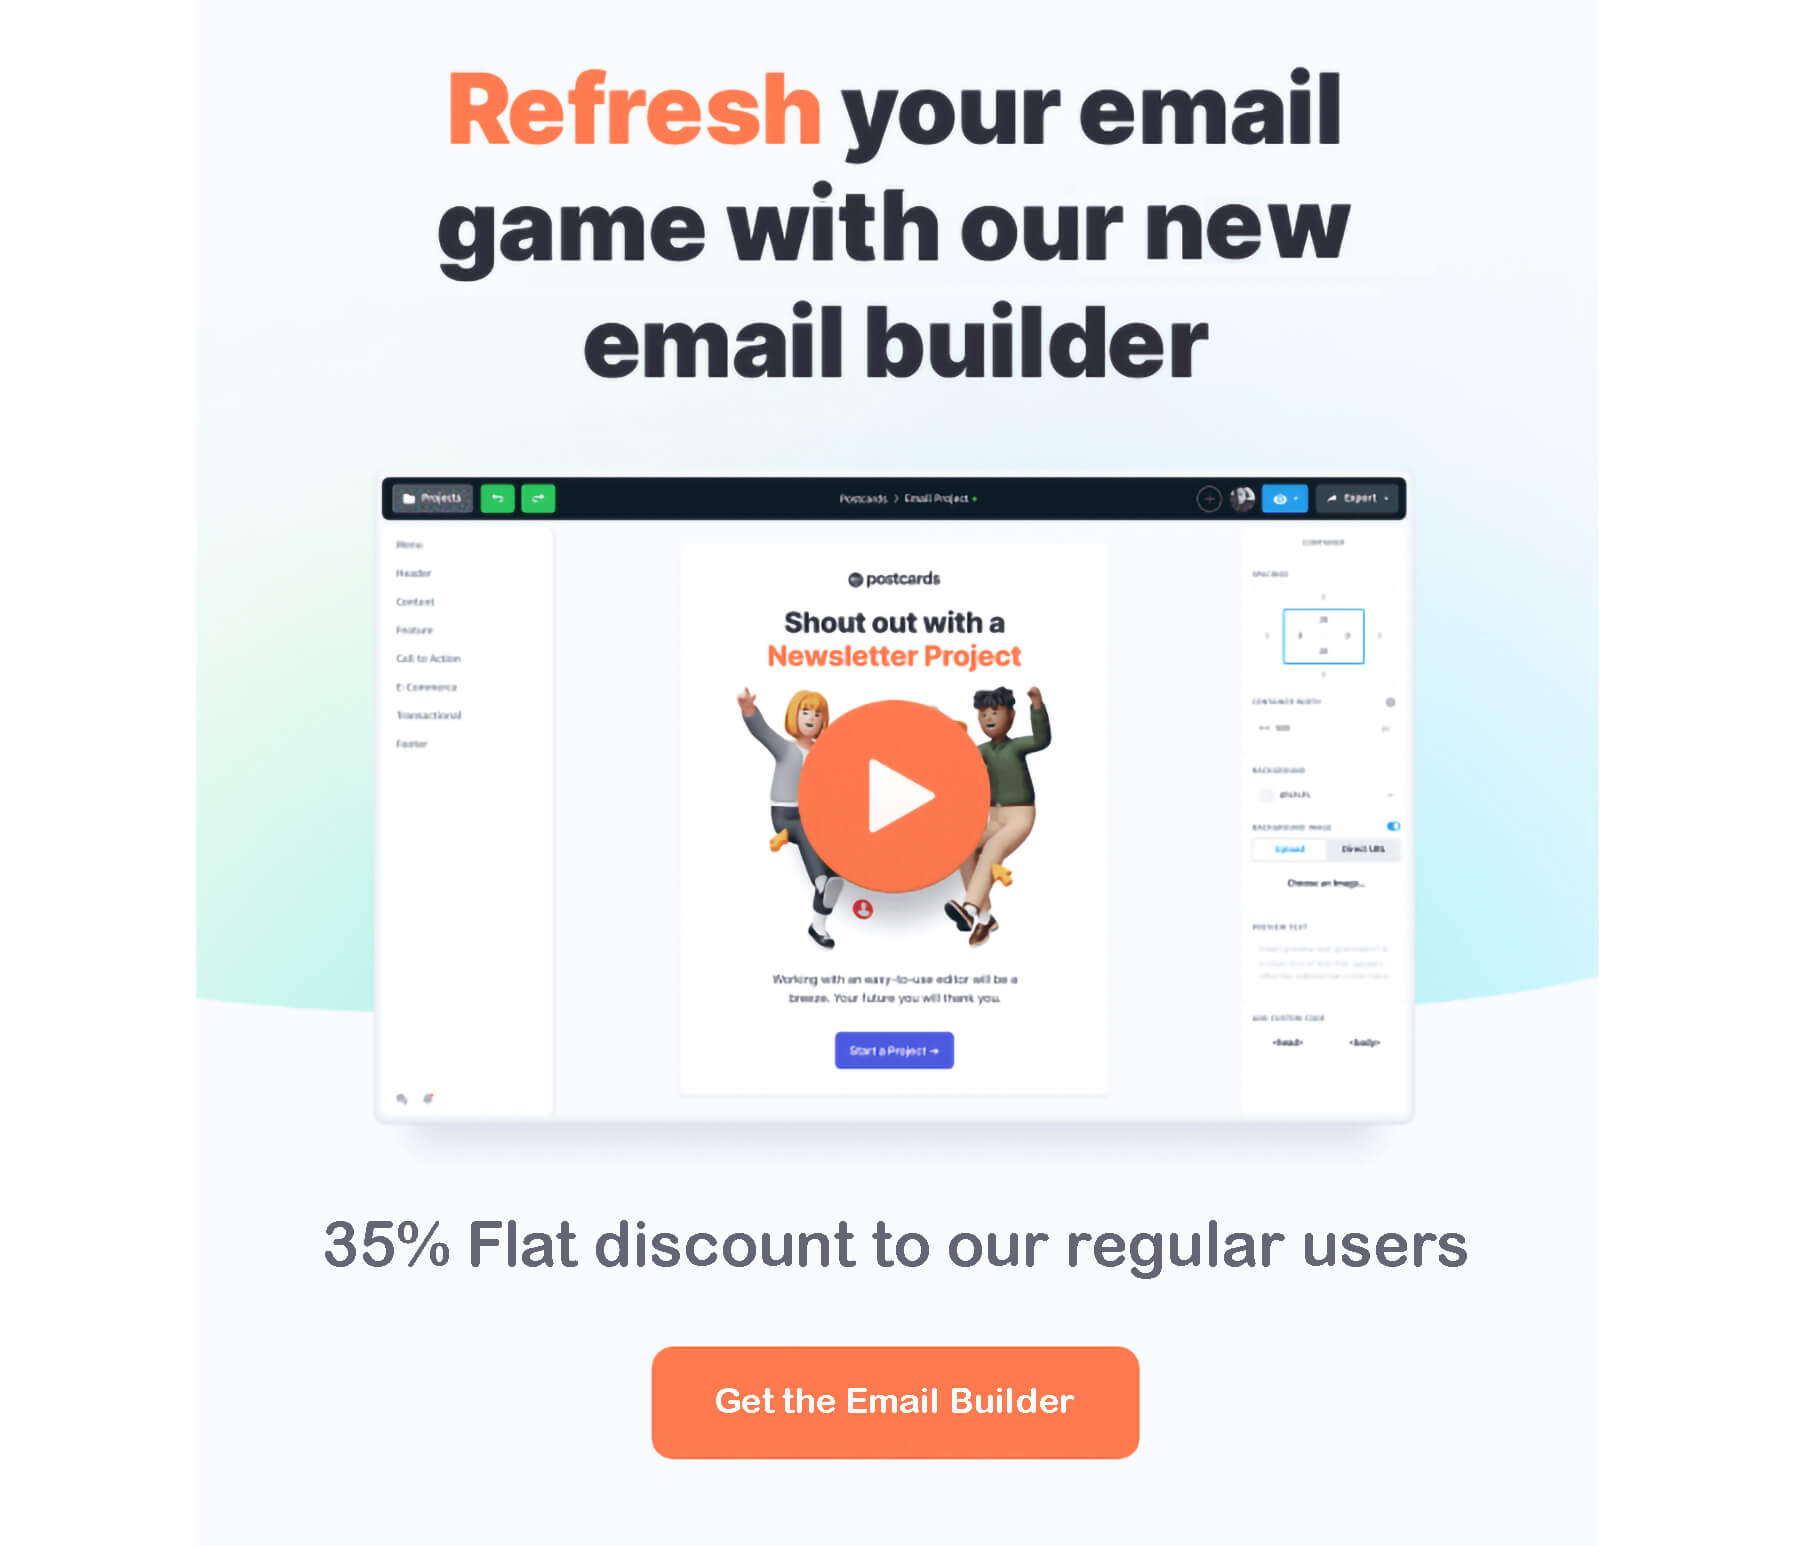 New product announcement email example